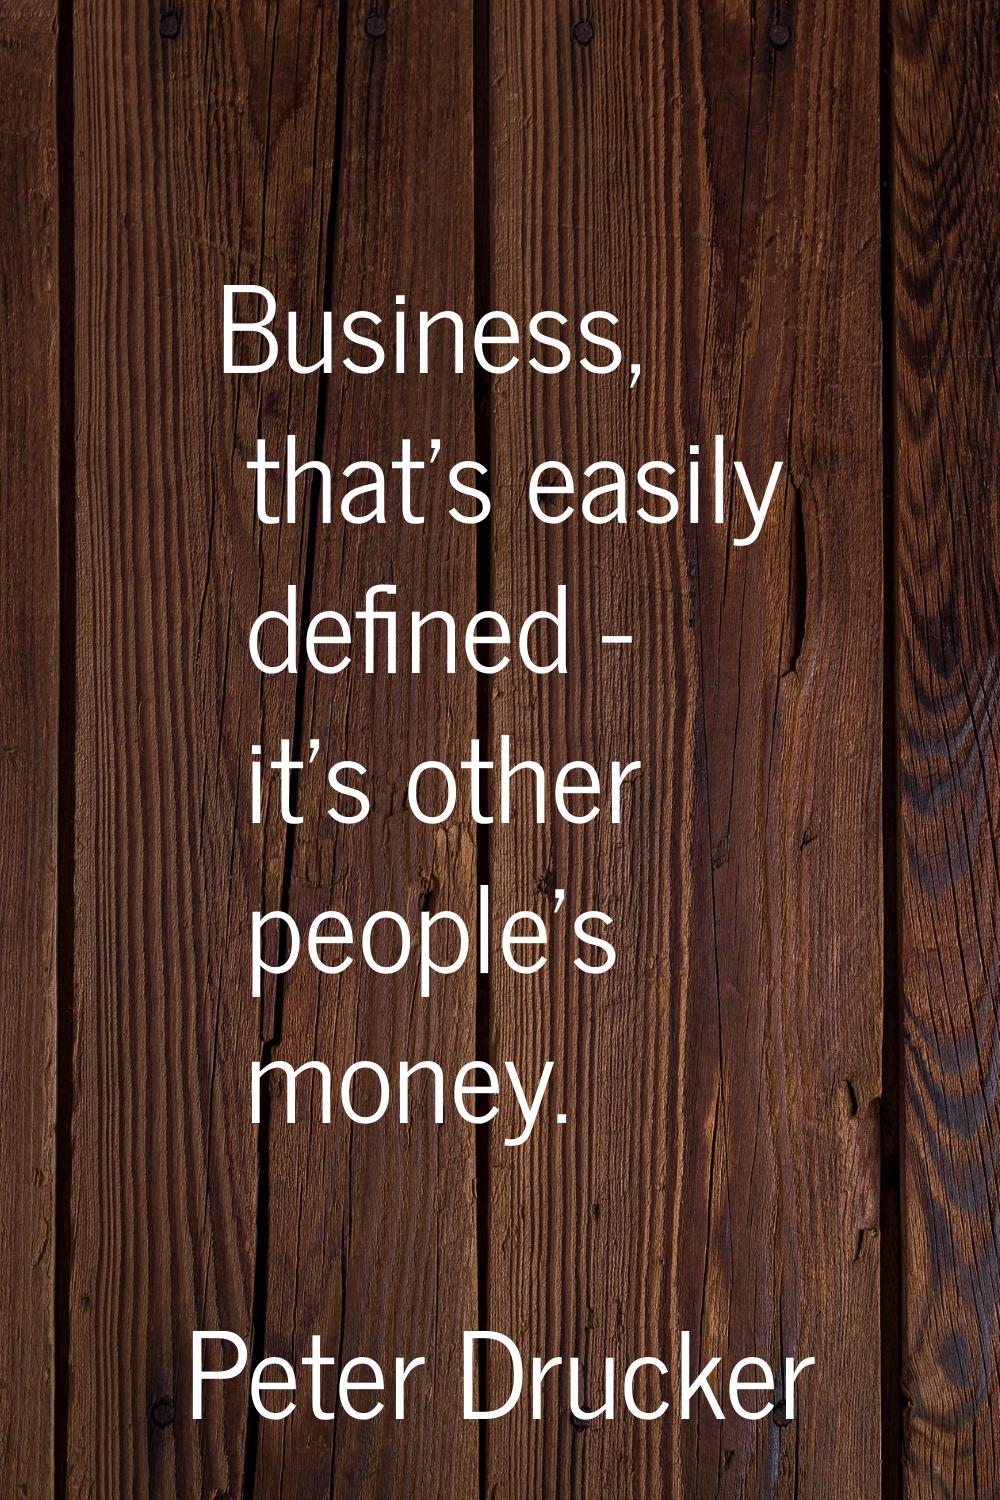 Business, that's easily defined - it's other people's money.